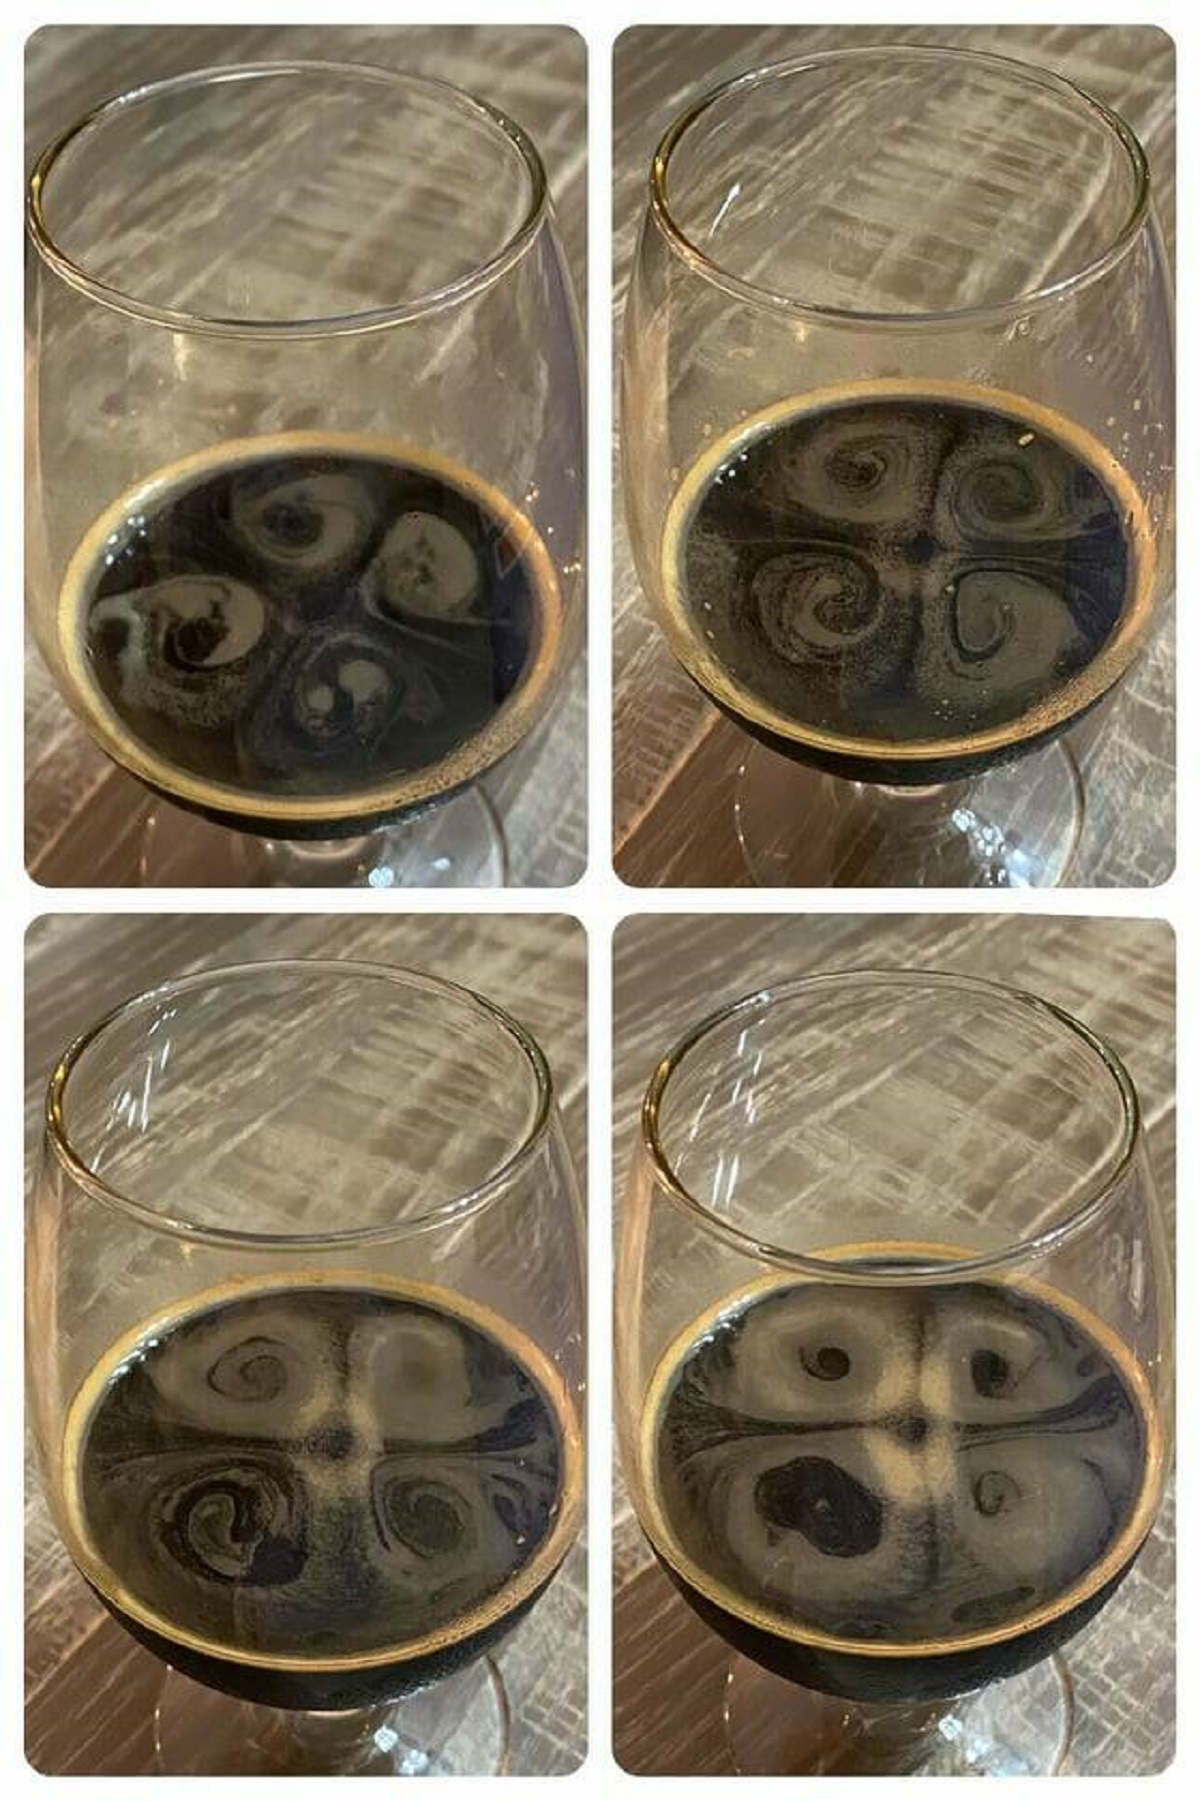 "After every drink of my beer, a new quadrant pattern slowly forms from the random foam"